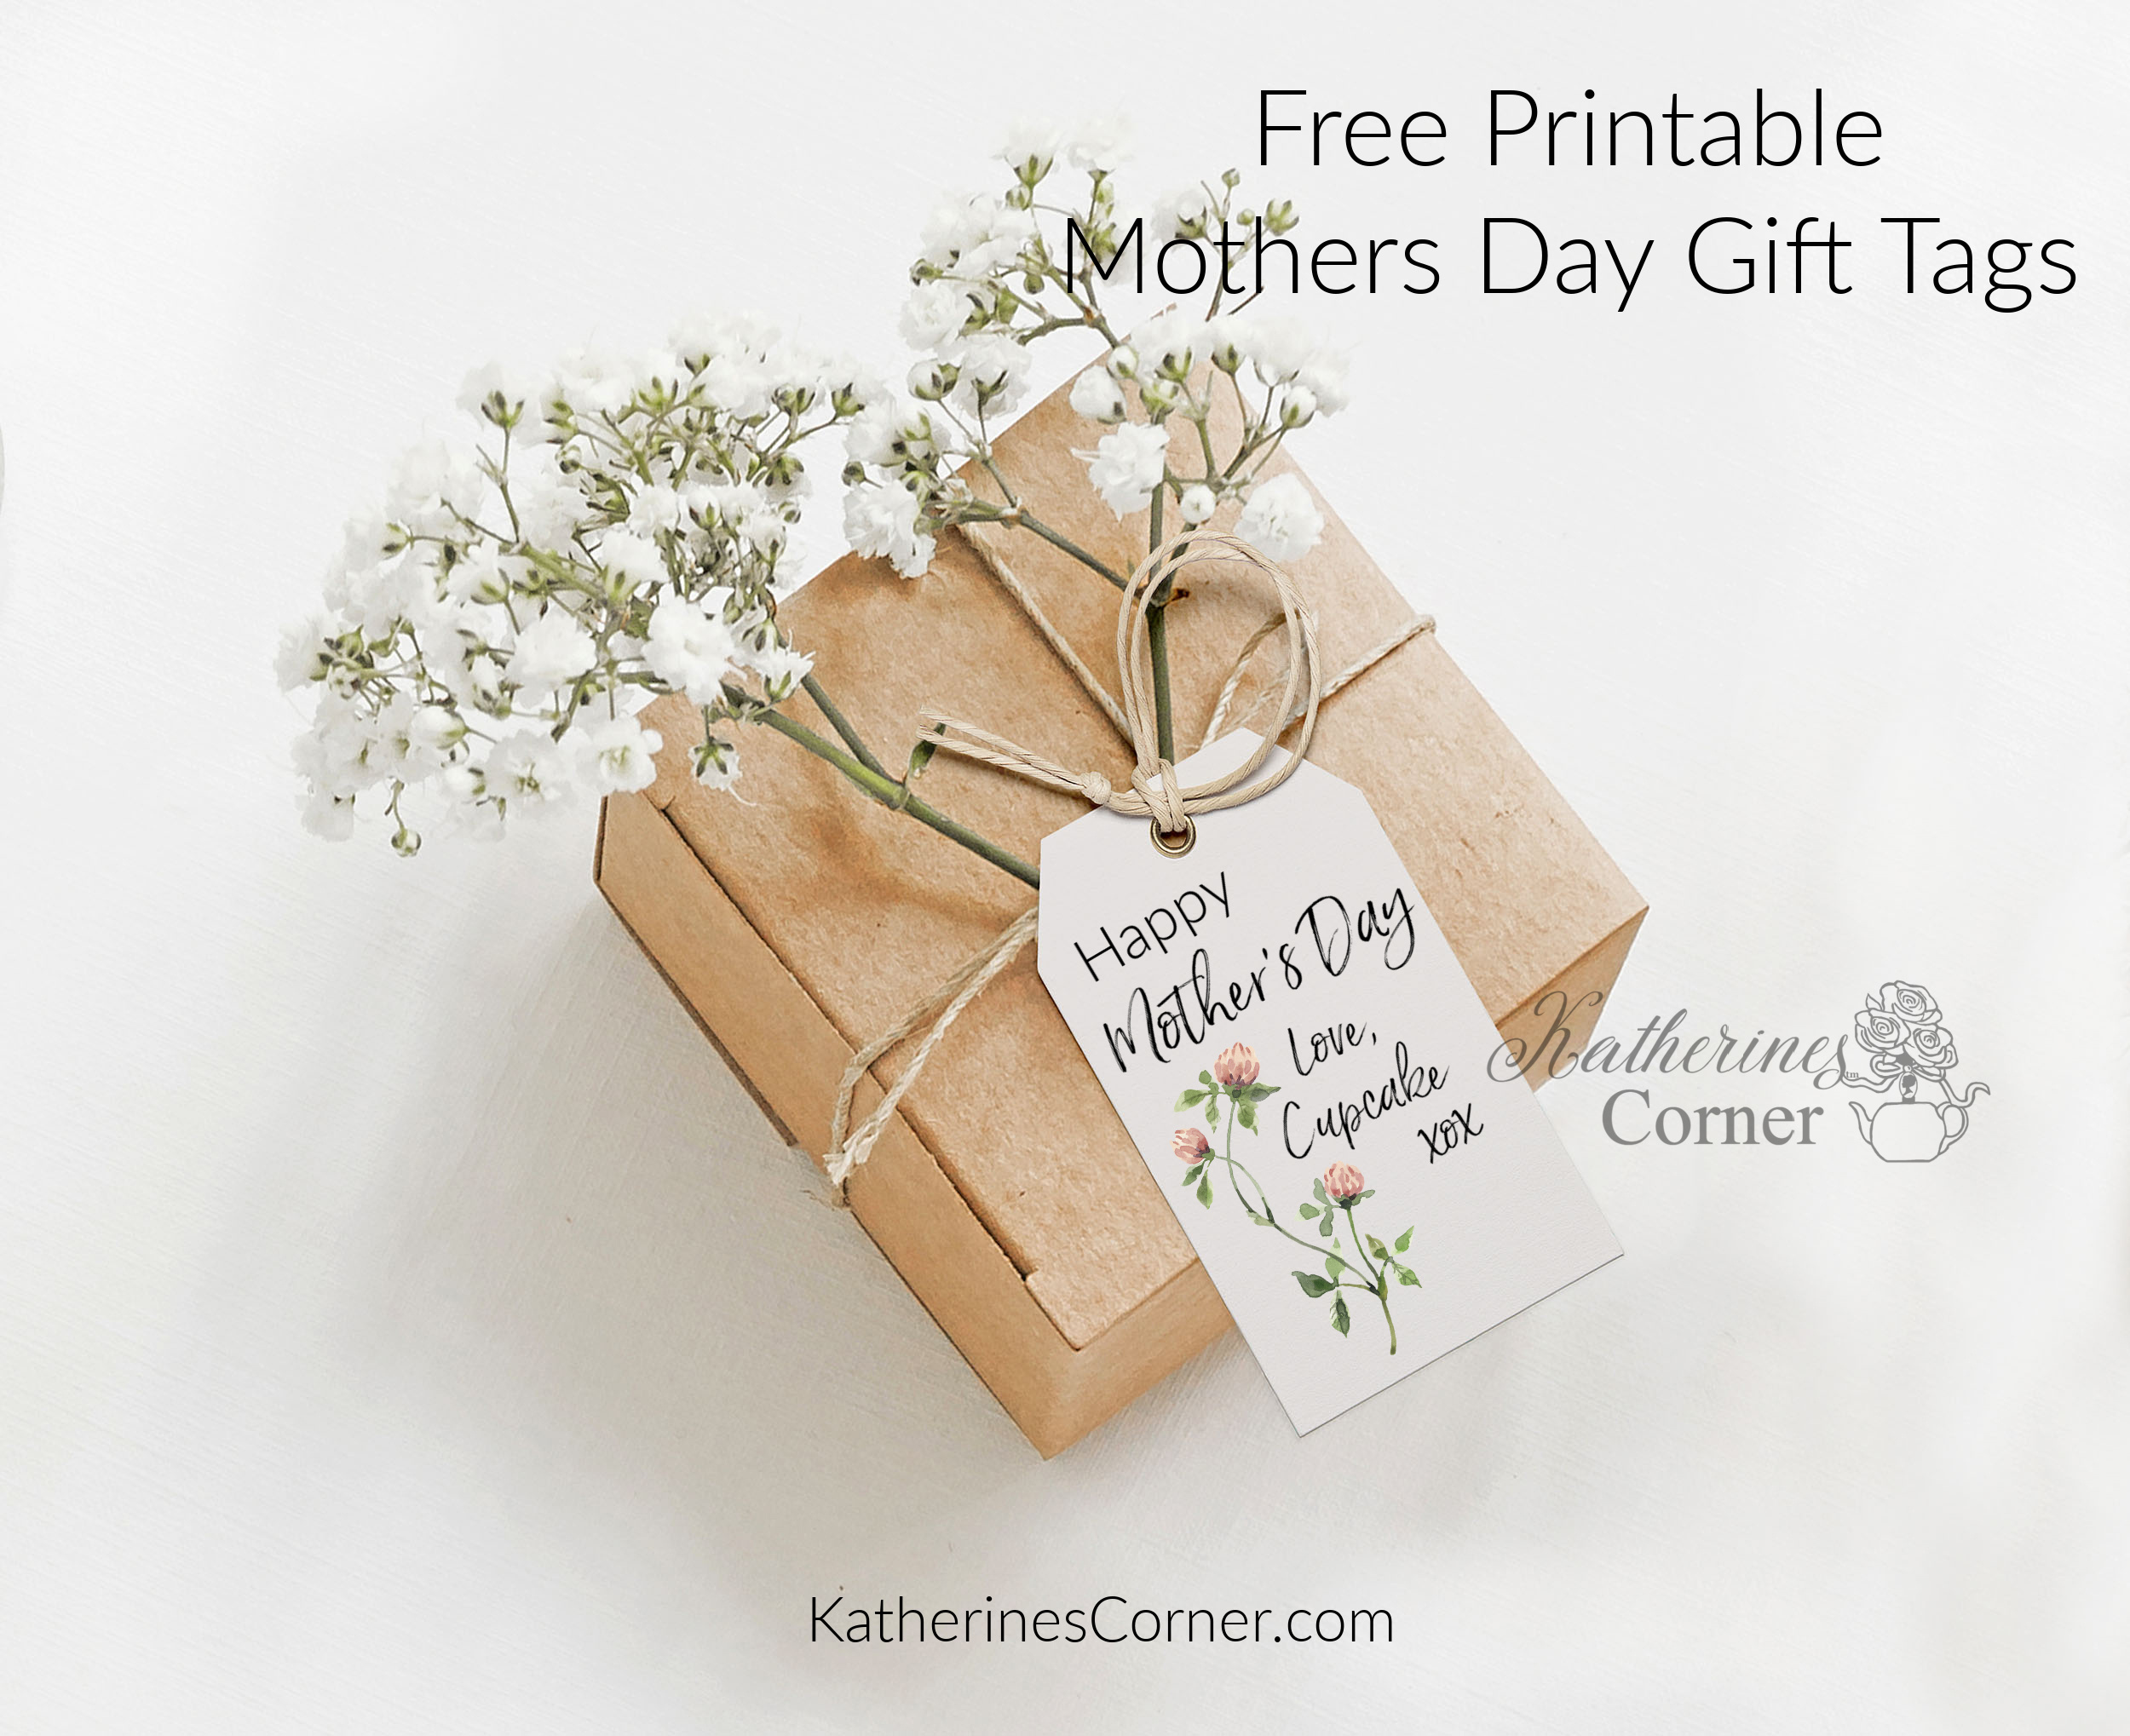 Free Printable Mother’s Day Gift Tags